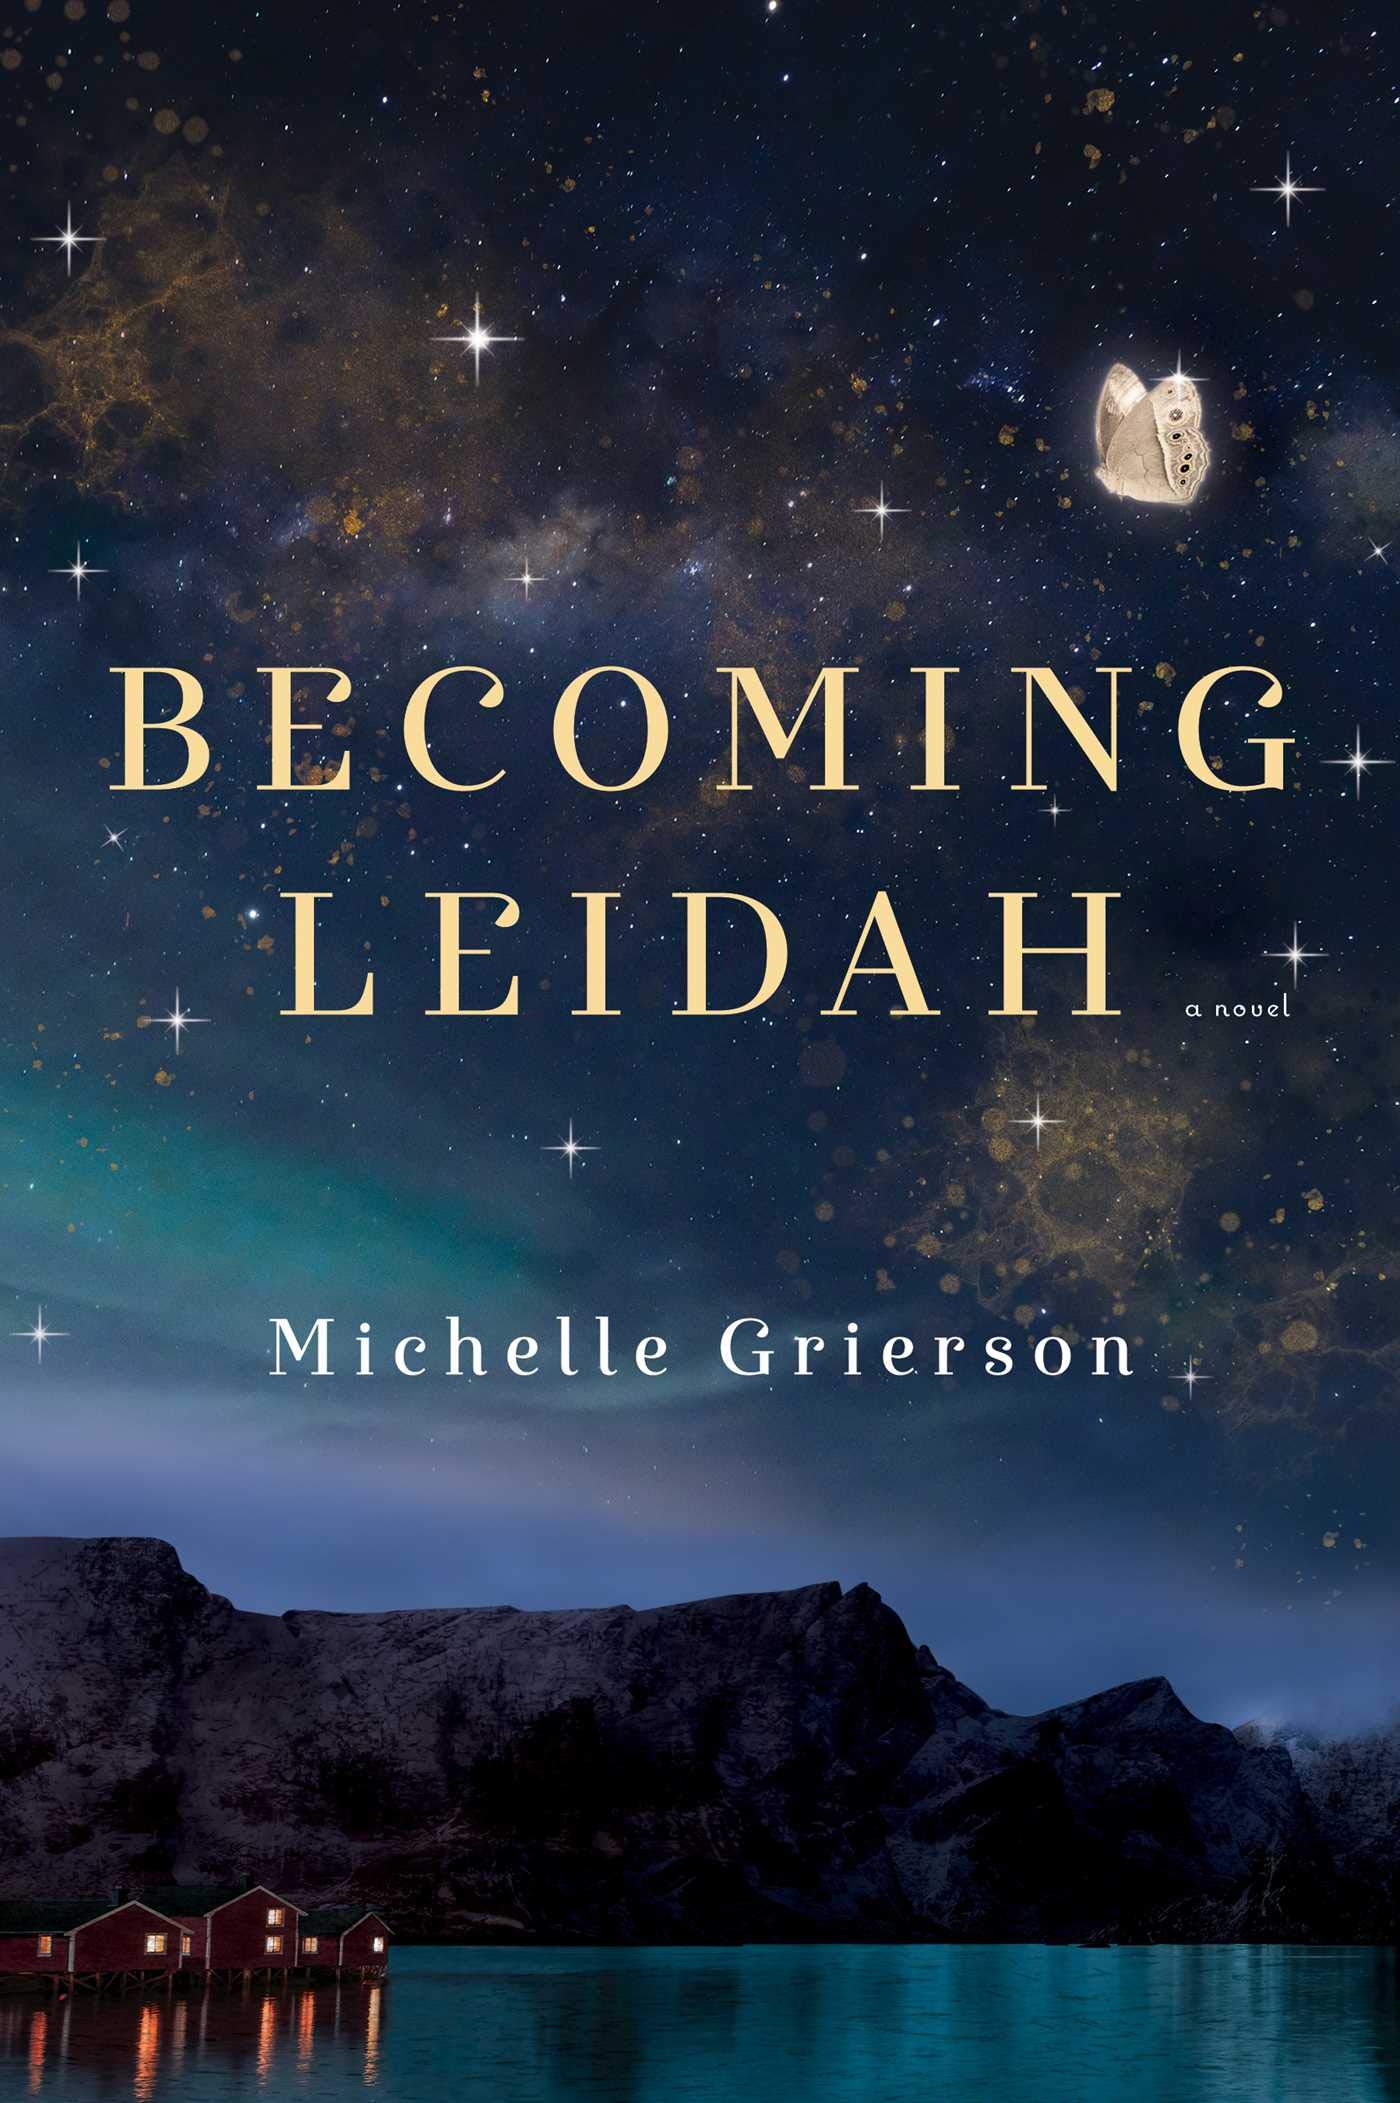 Grierson, Michelle. Becoming Leidah. 2021.